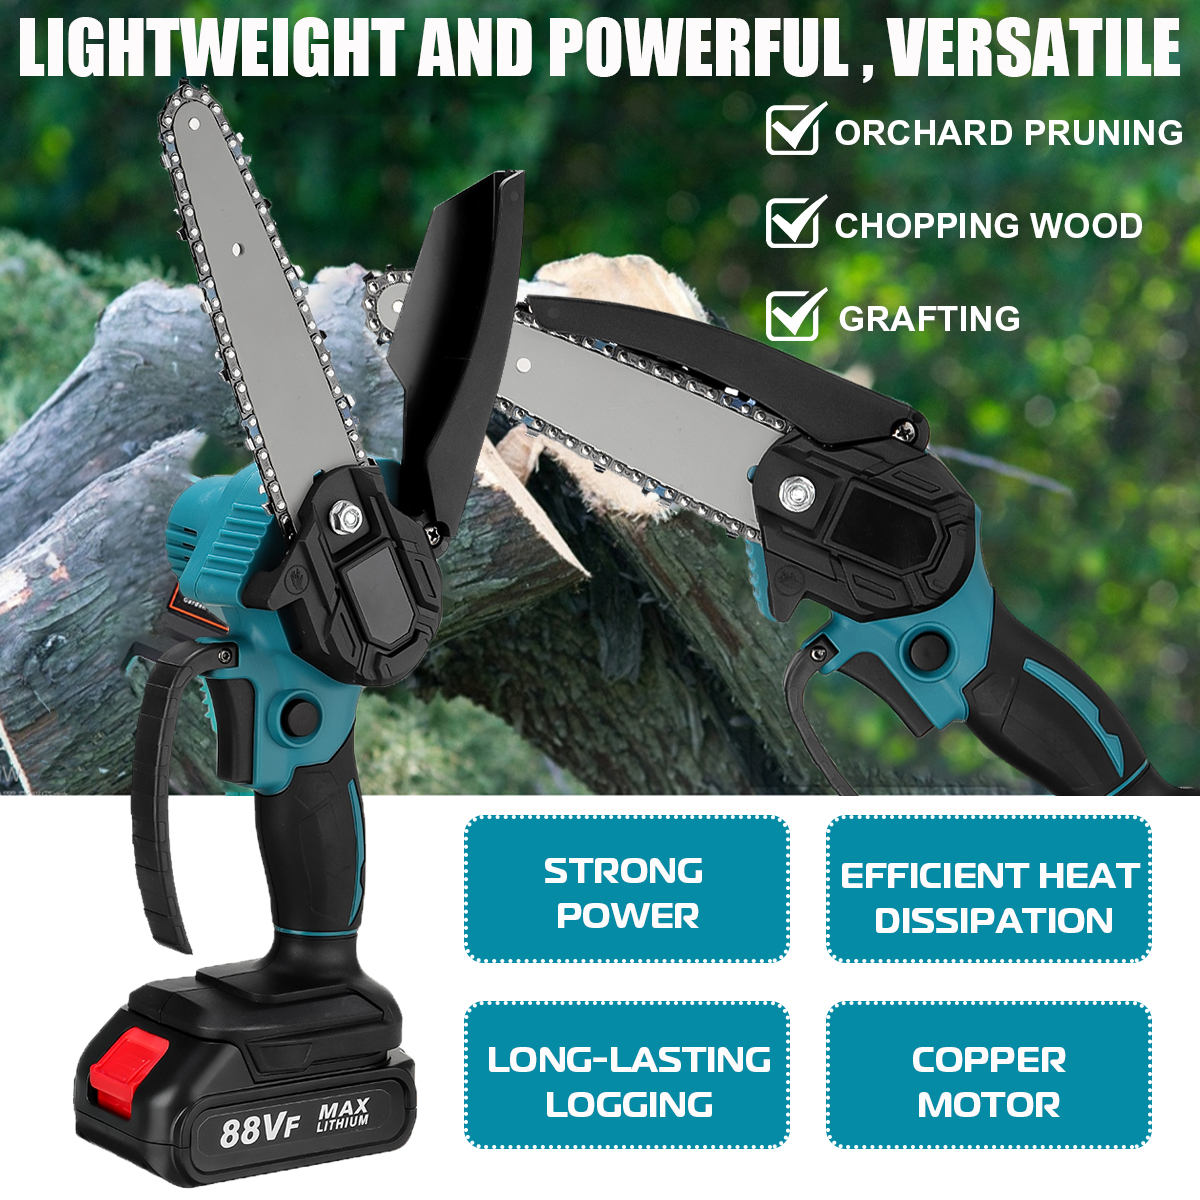 2000W-4000rpm-88VF-6quot-Electric-Saw-Chainsaw-Cordless-Wood-Cutting-Tool-Chainsaw-withwithout-Batte-1938018-3